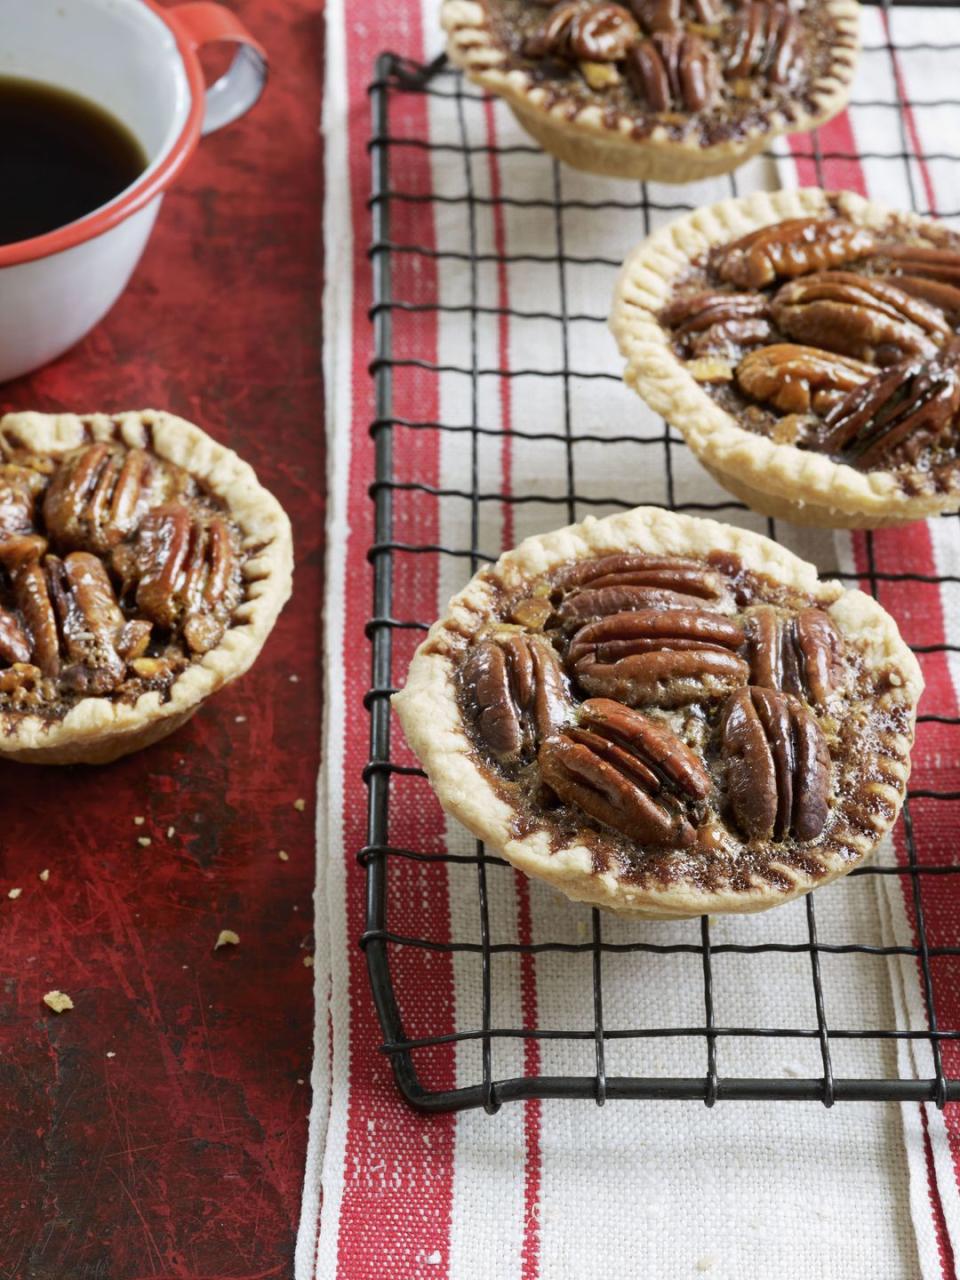 mini chocolate pecan tartlets on a wire rack over a red and white striped kitchen towel